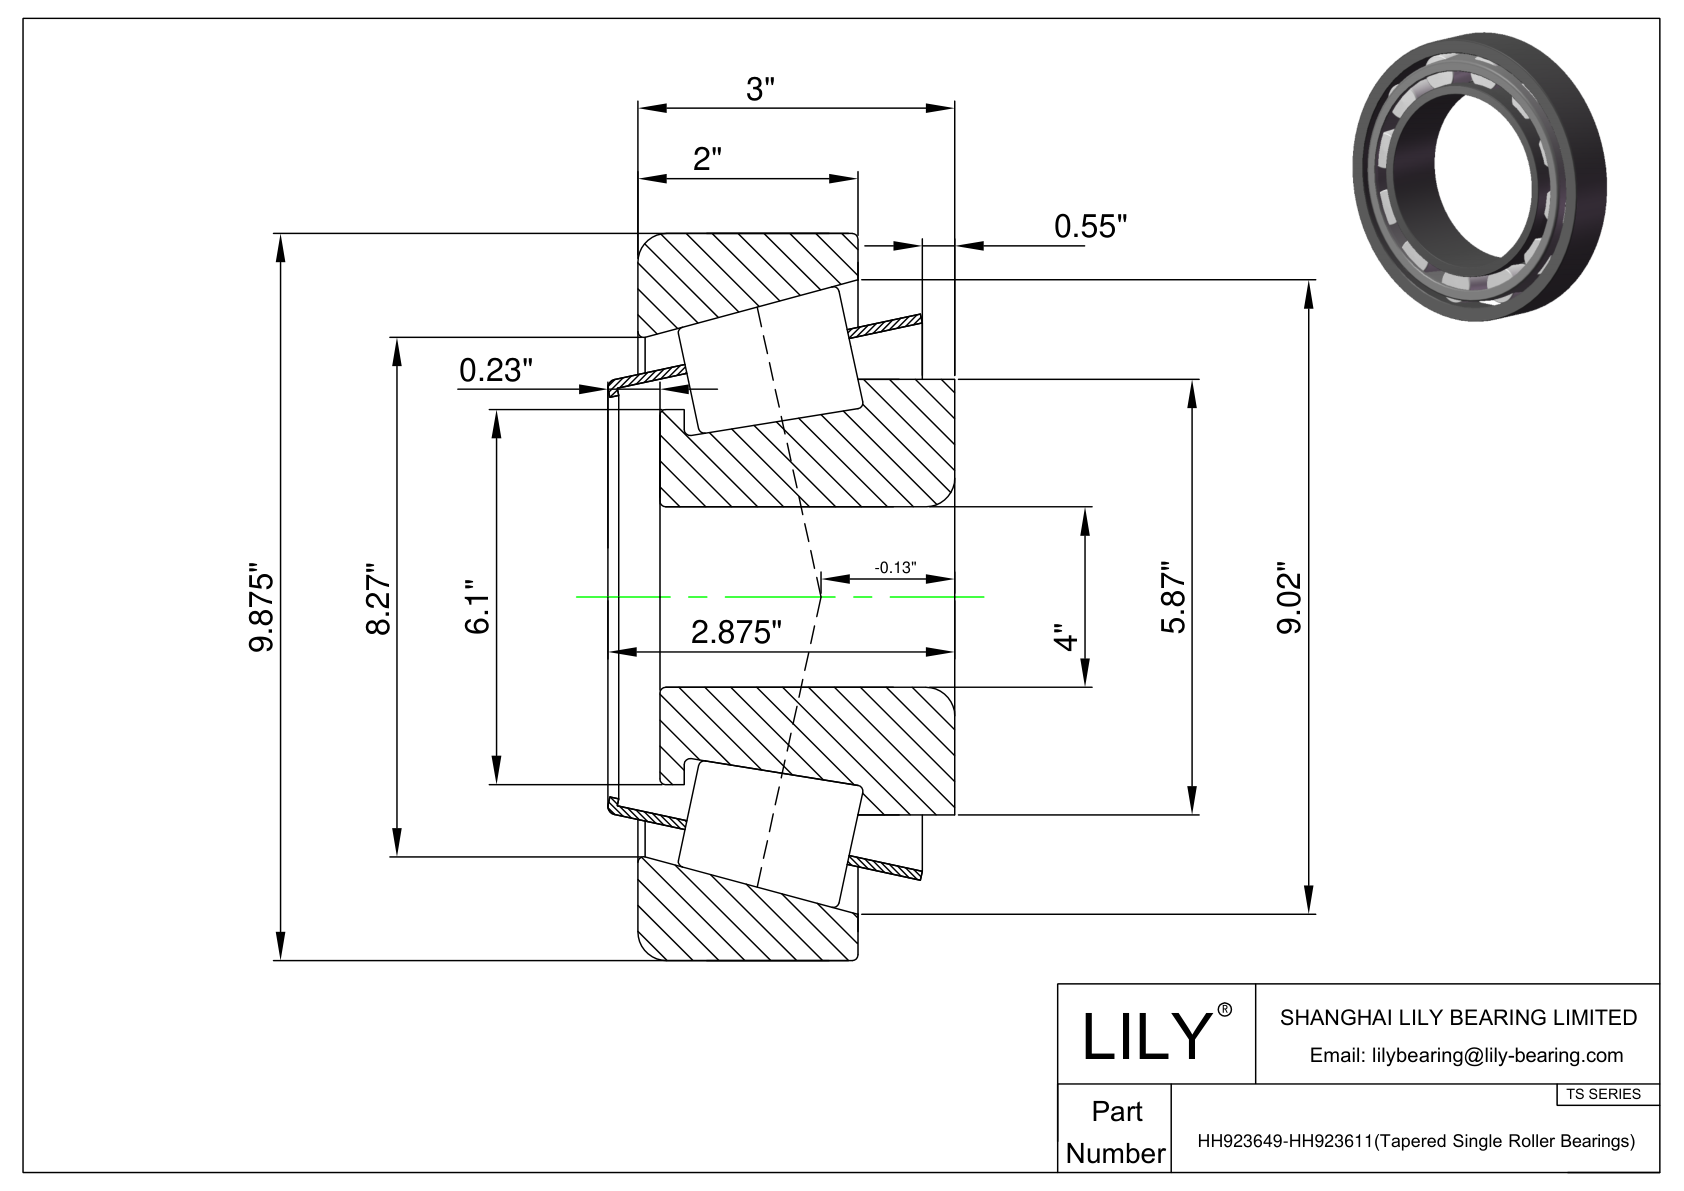 HH923649-HH923611 TS (Tapered Single Roller Bearings) (Imperial) cad drawing